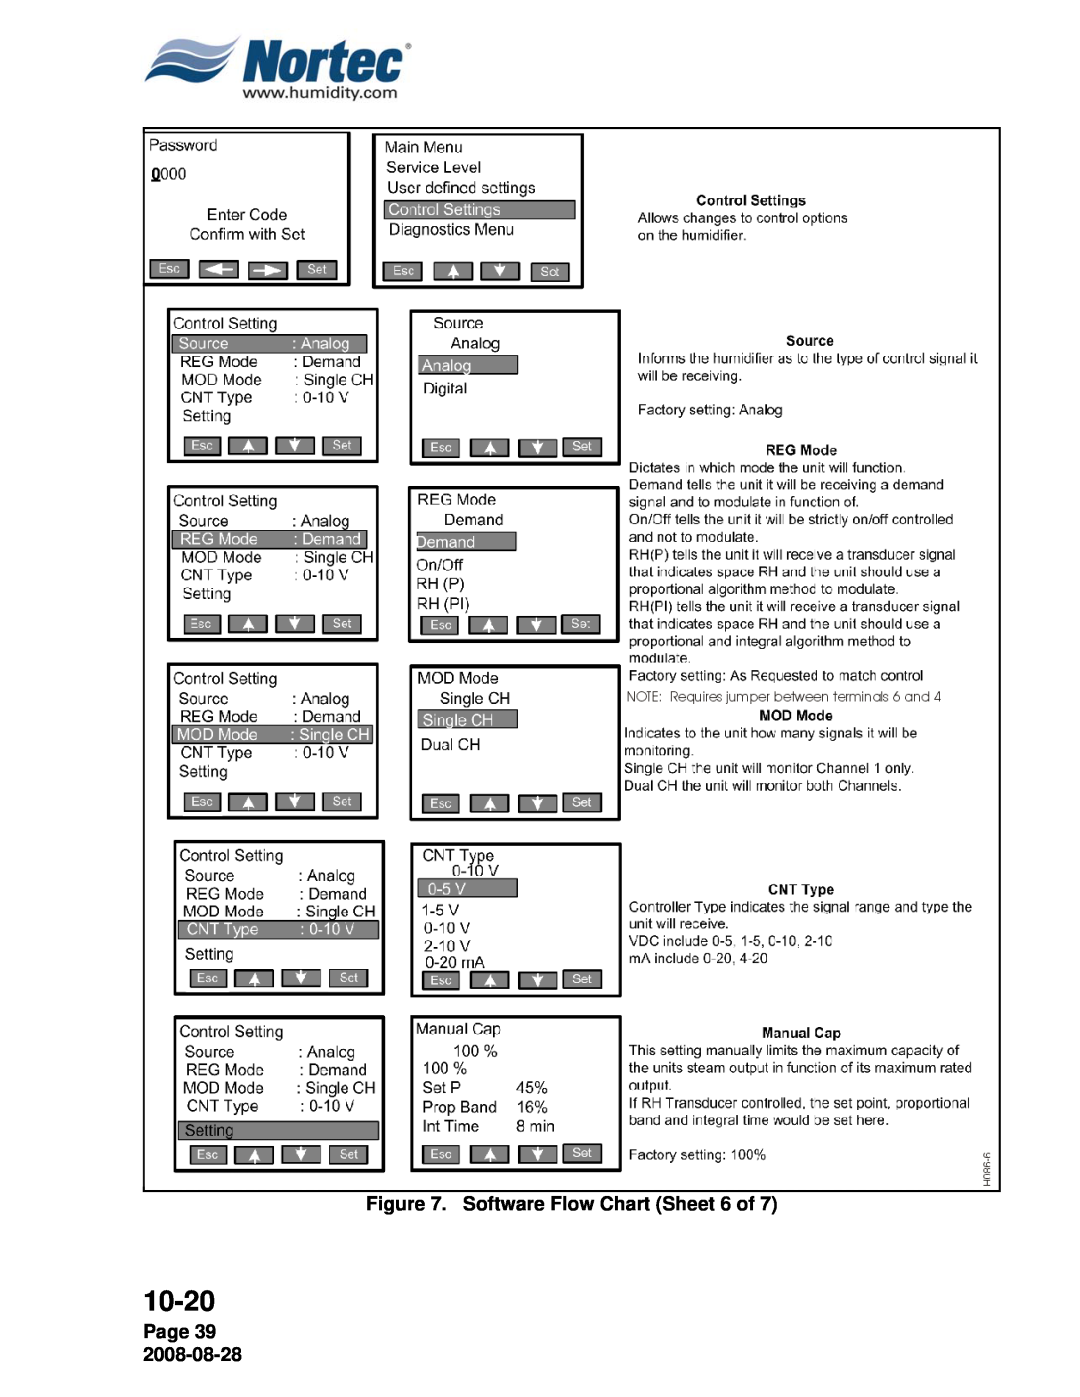 Nortec NH Series installation manual Software Flow Chart Sheet 6 of, Page 39, 10-20 